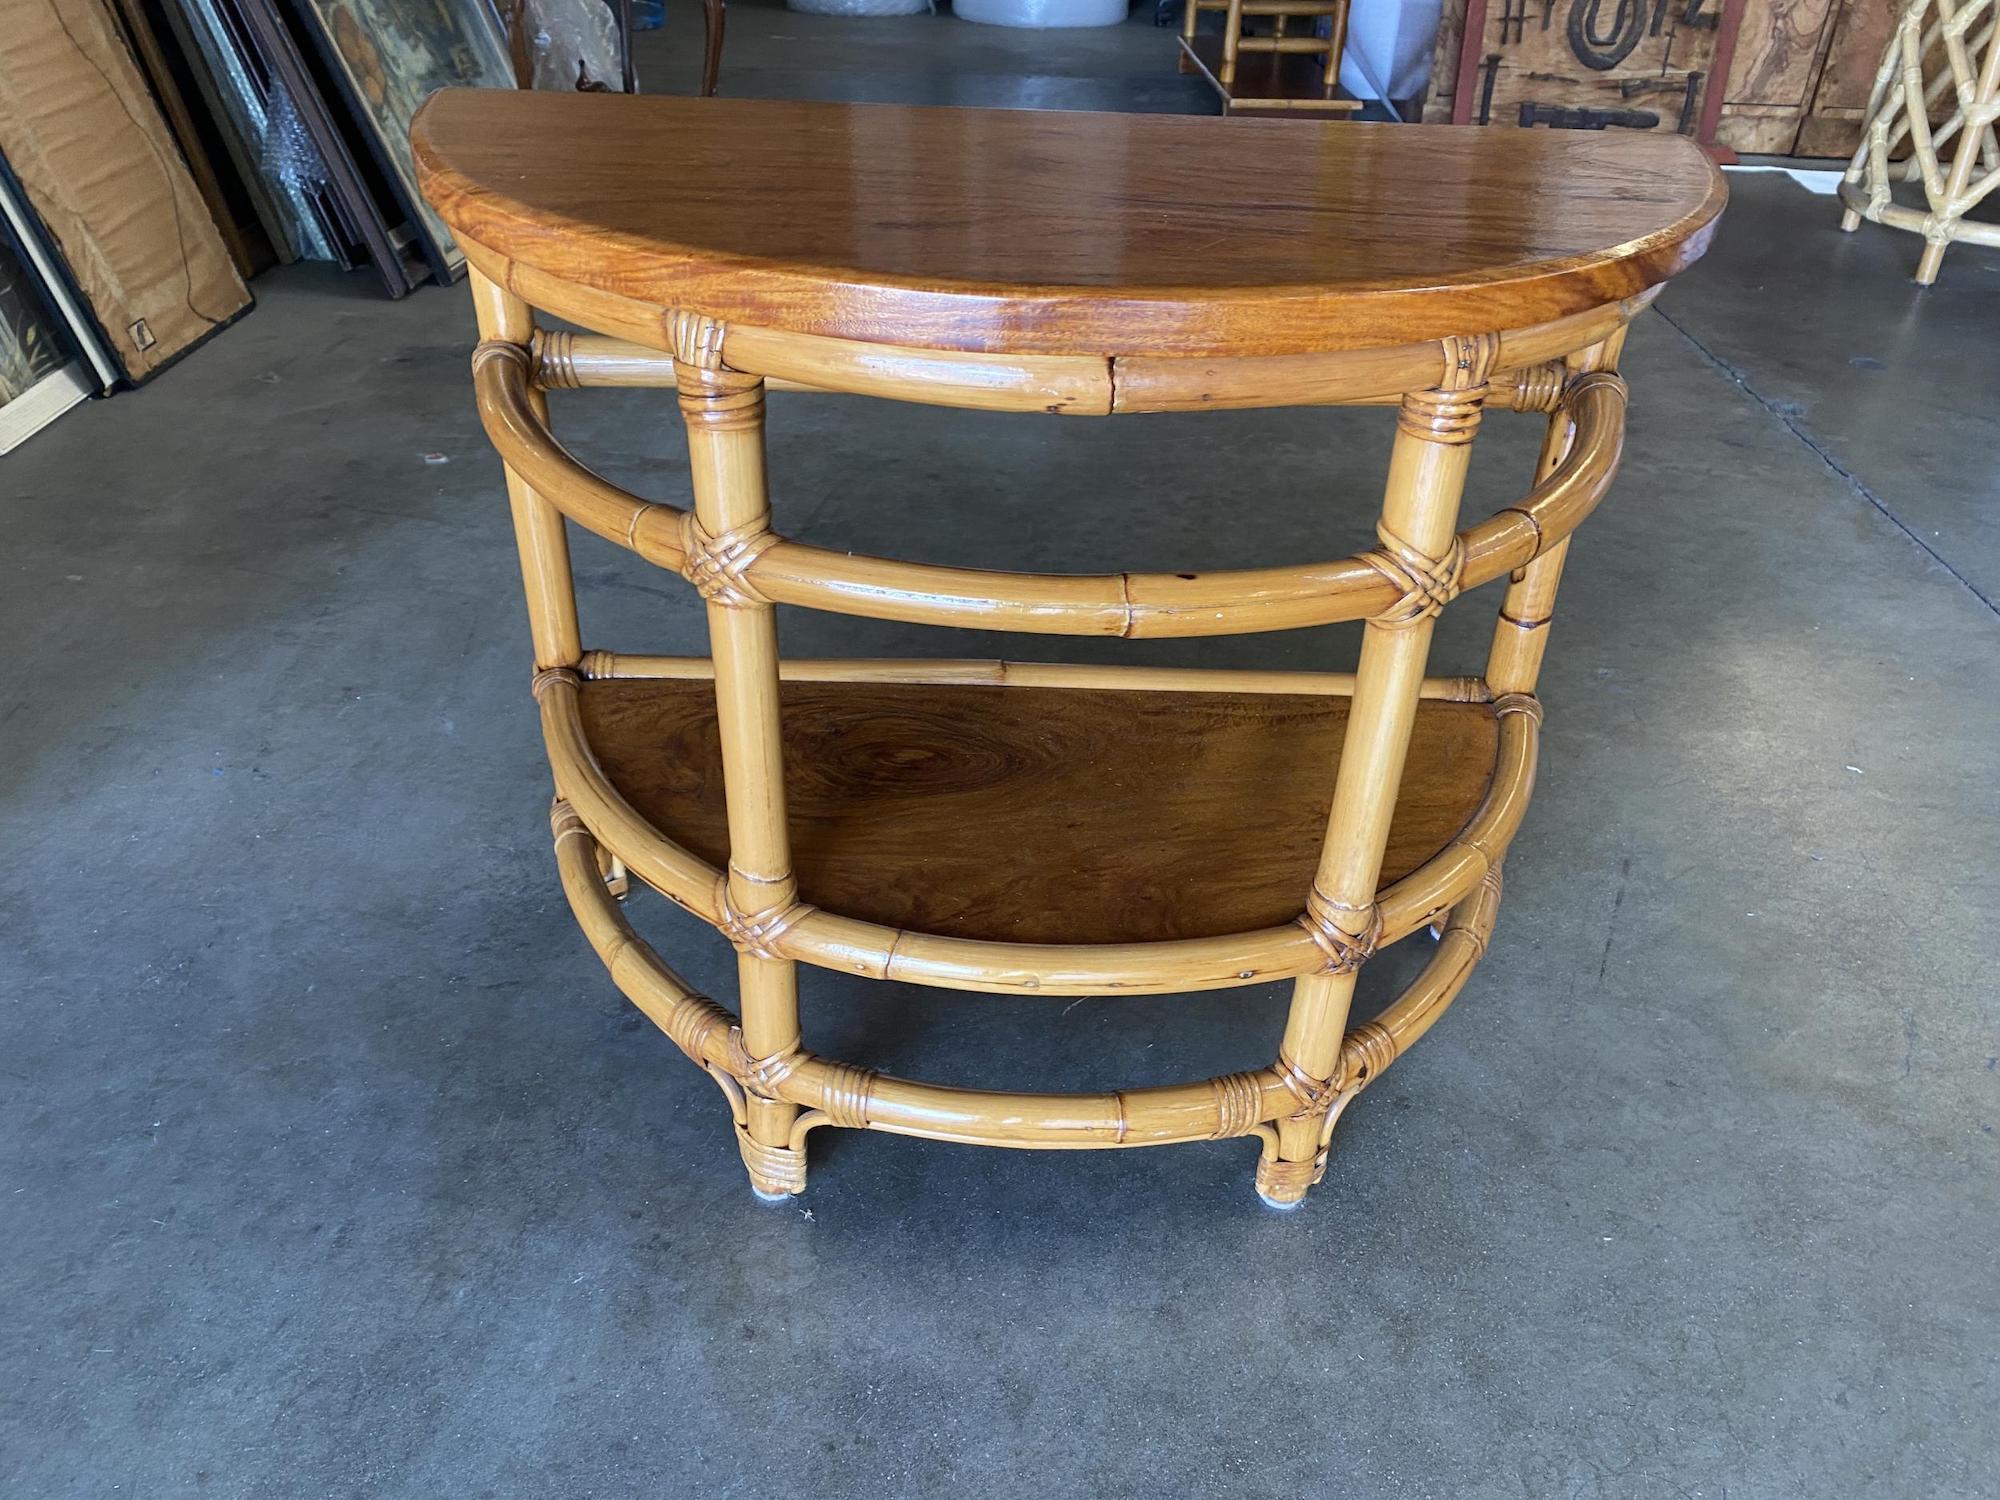 Vintage 1940s two-tier rattan side table featuring stylized single strand legs, ladder sides and beautiful half round mahogany tops.
 
Tropical Sun Rattan was started in 1934 at 117 West Colorado Blvd in Pasadena. By 1938 we had showrooms in the